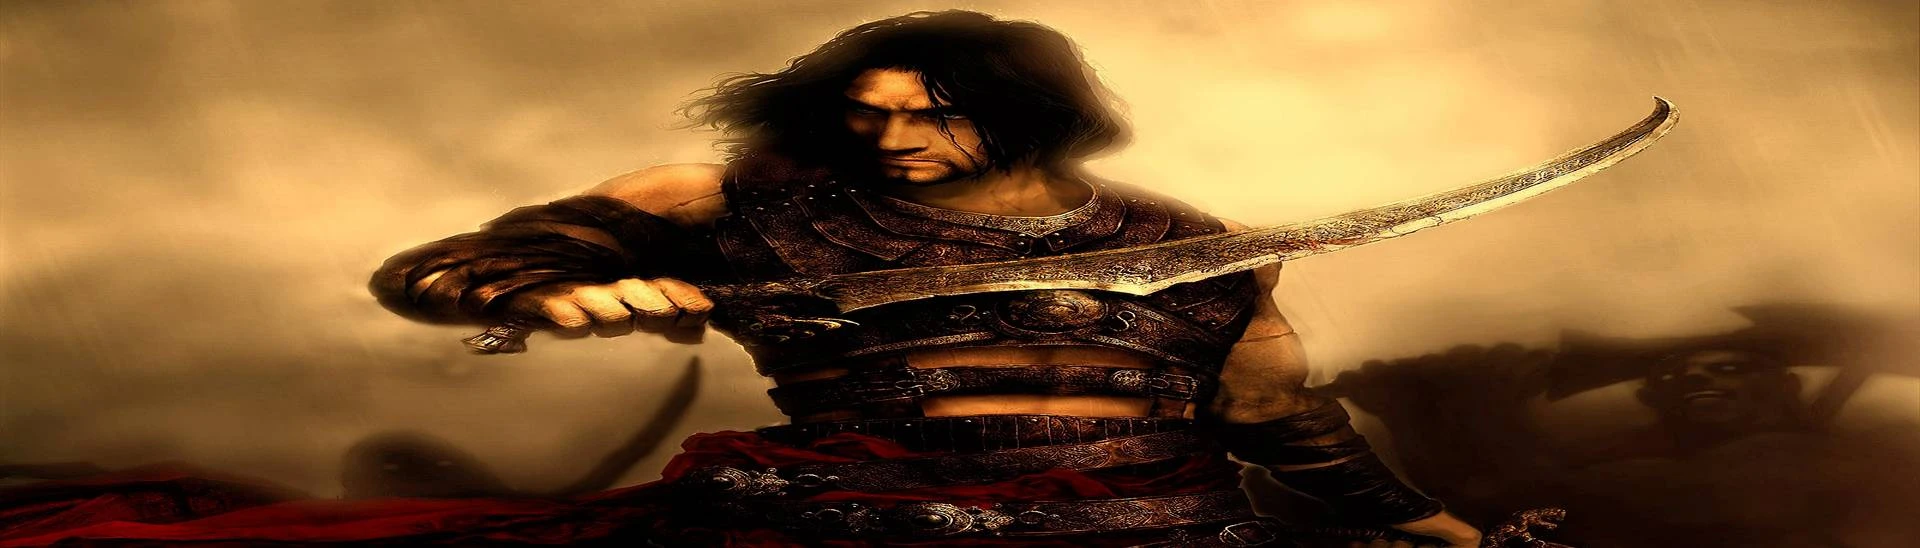 Steam Community :: :: Prince of Persia Warrior Within, Unreal